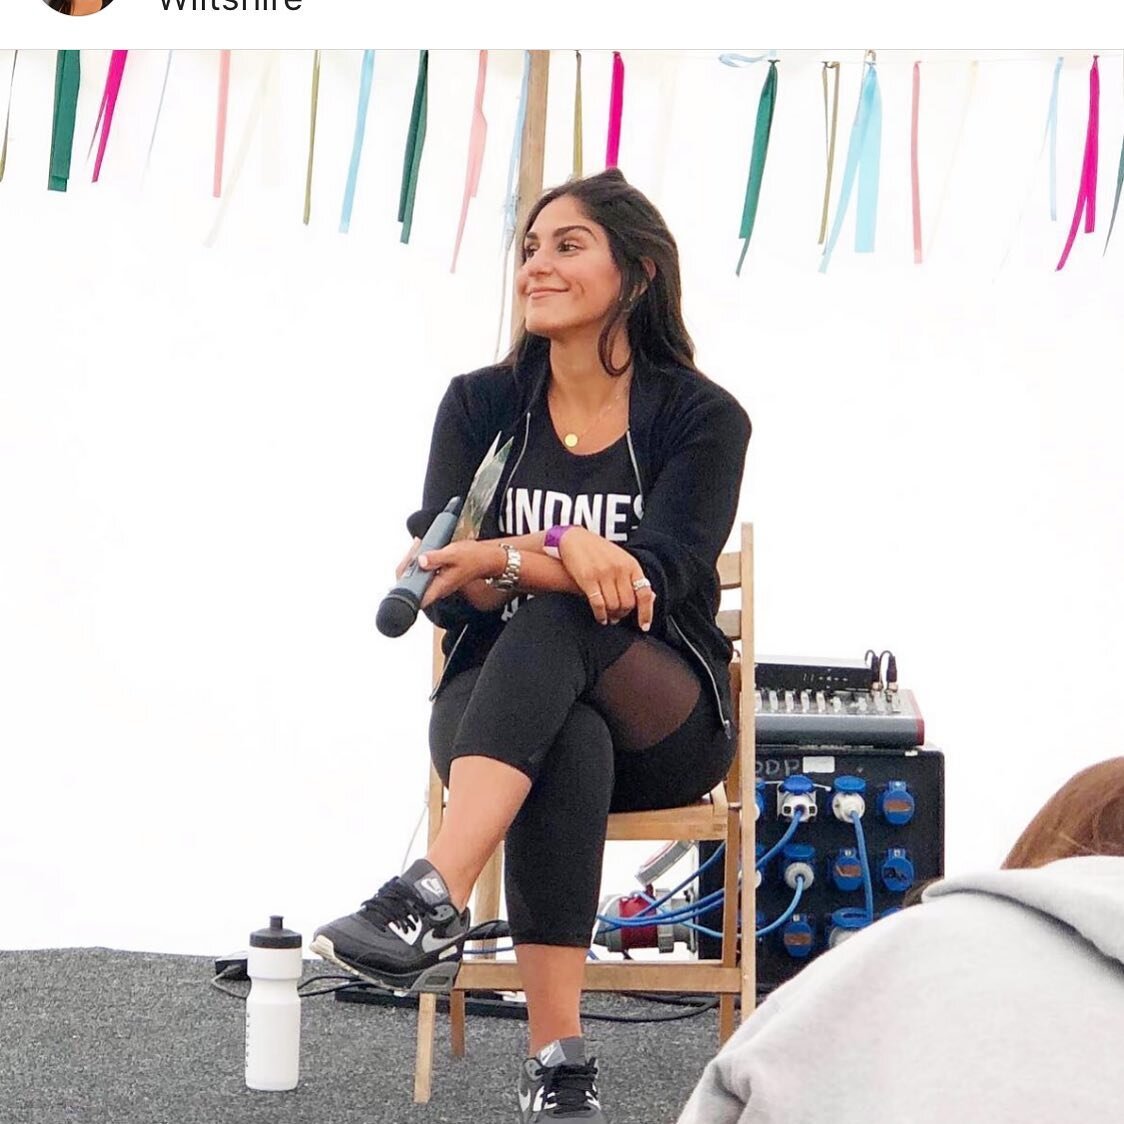 We *love* this pic of our @shahroo_izadi who can&rsquo;t wait for wellness festivals to be back up and running so she can &lsquo;work in leggings and talk about kindness&rsquo; again. 😀